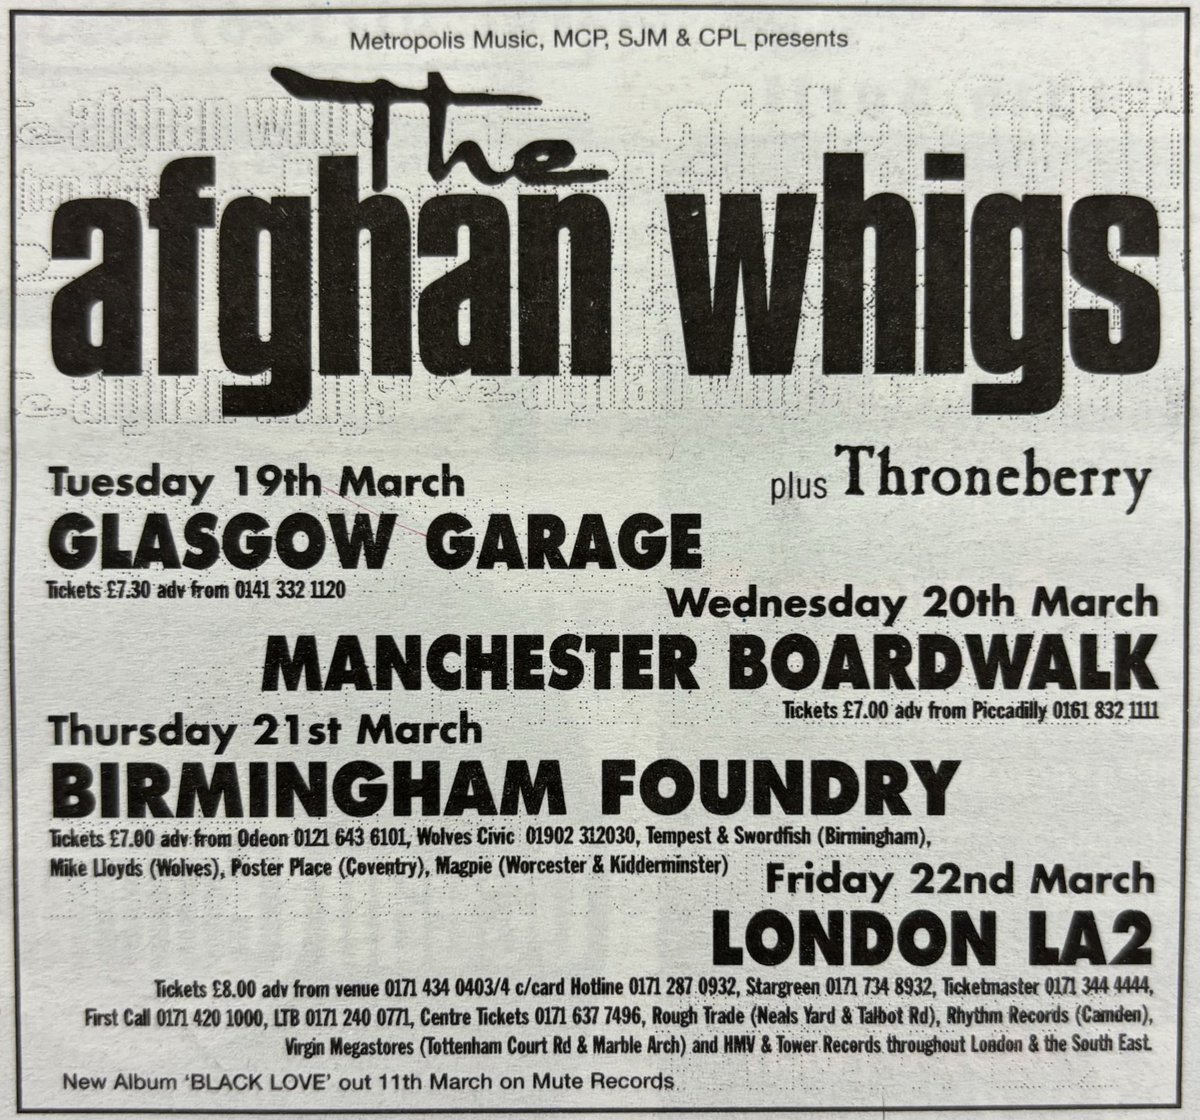 Afghan Whigs tour! Melody Maker, 16 March 1996. #MelodyMaker 
#MyLifeInTheUKMusicPress #1996